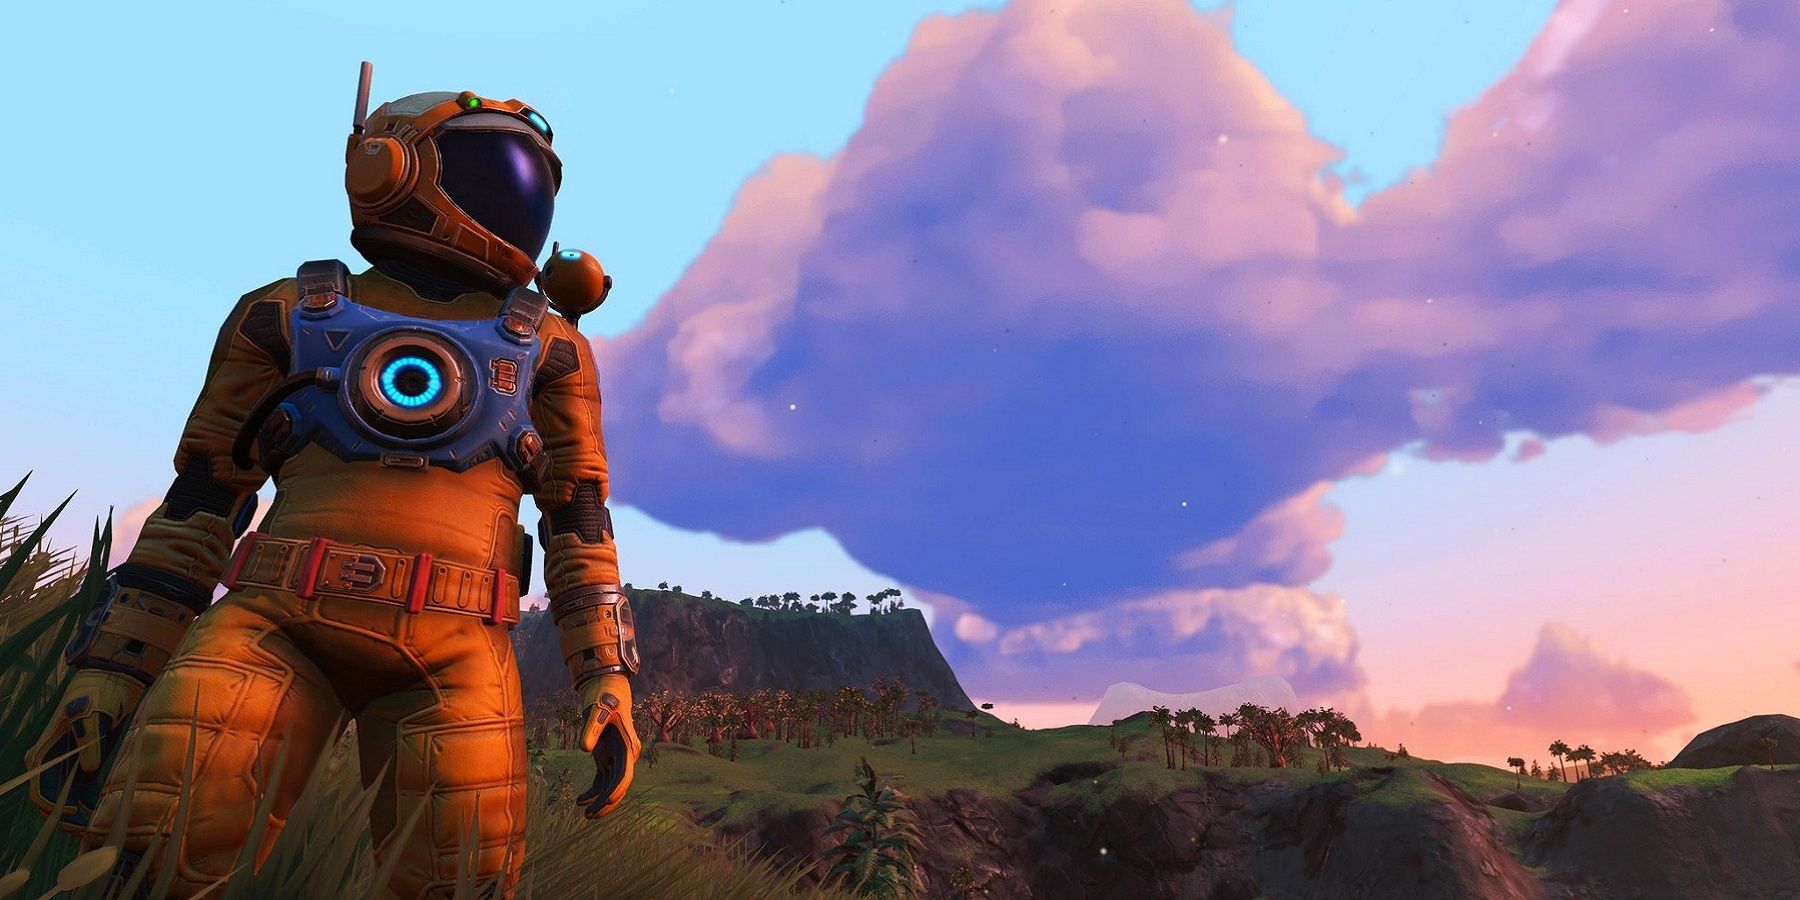 Image from No Man's Sky showing the Traveller on a pleasant Earth-like planet.